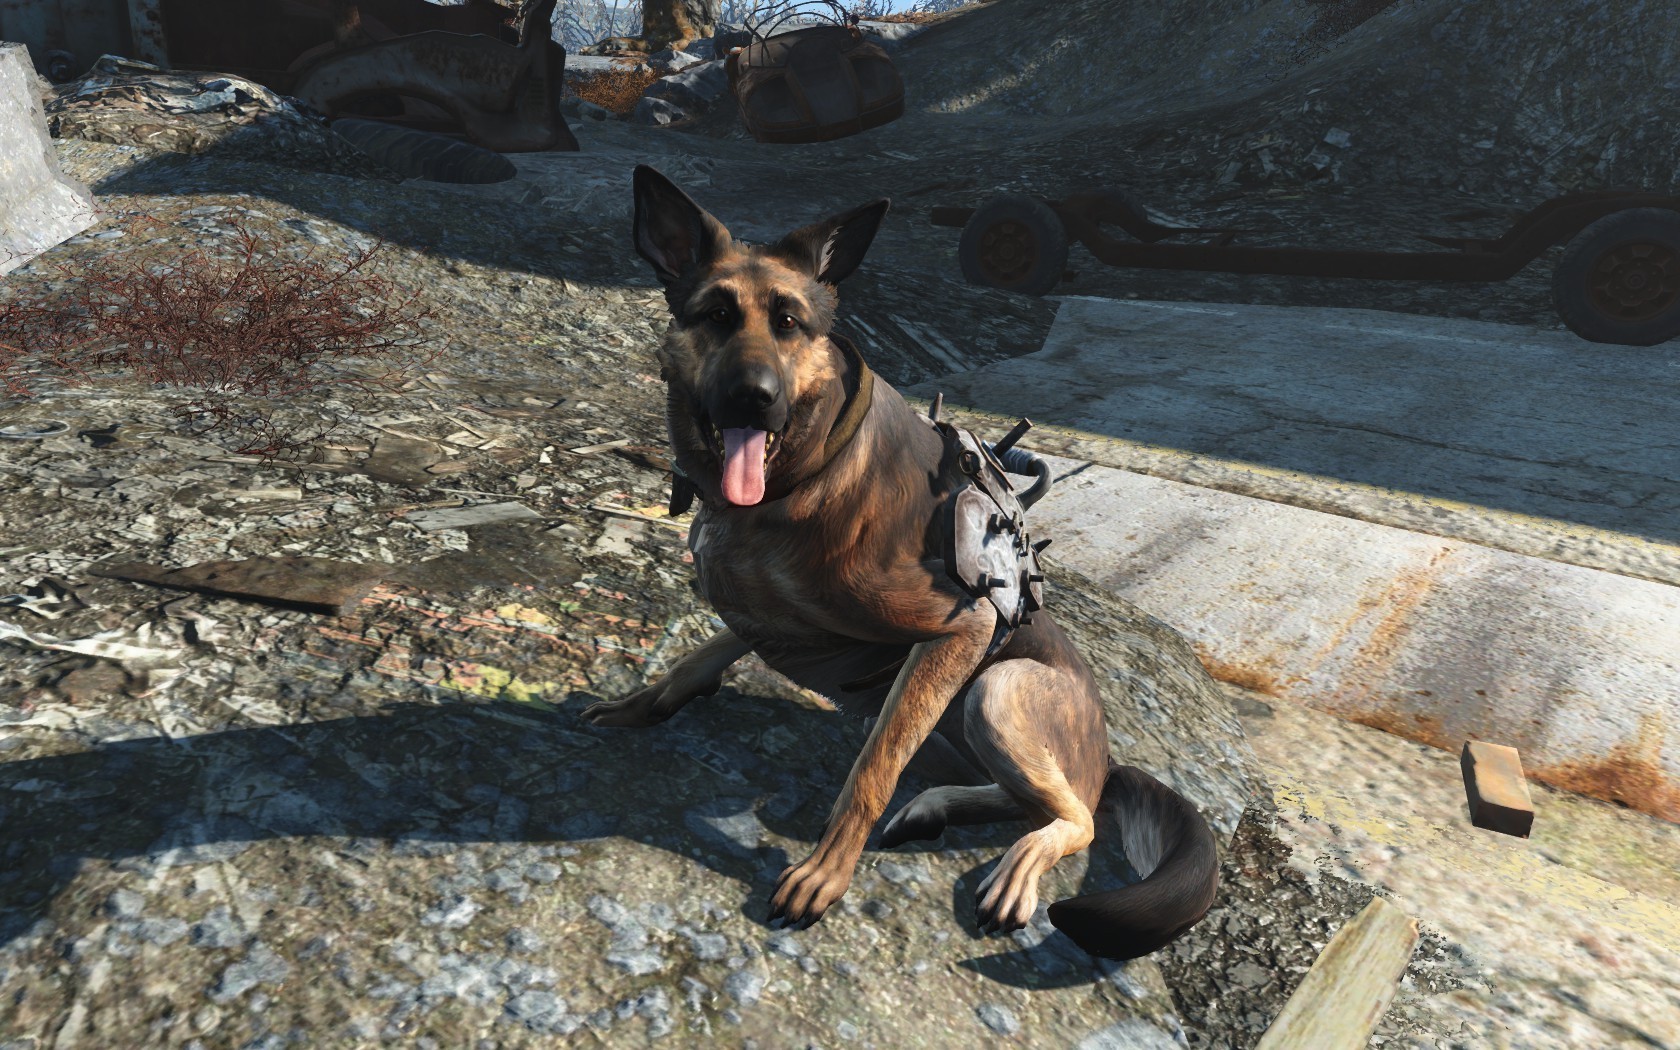 can dogmeat die in fallout 3